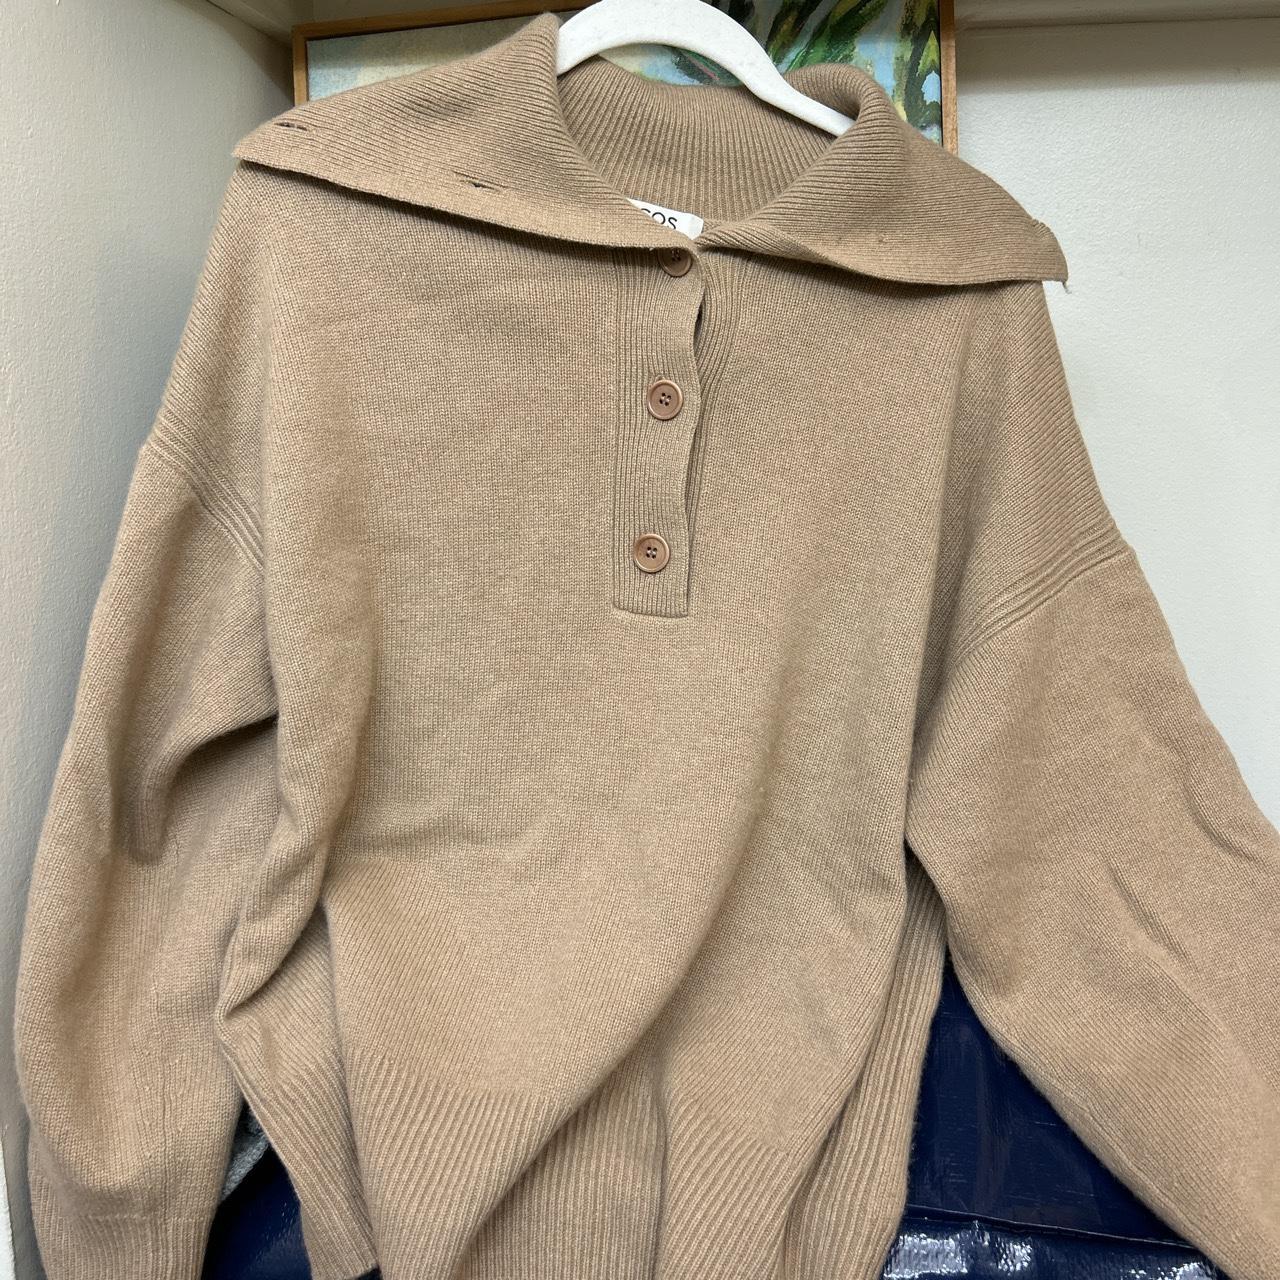 COS 100% cashmere limited edition bought it in... - Depop